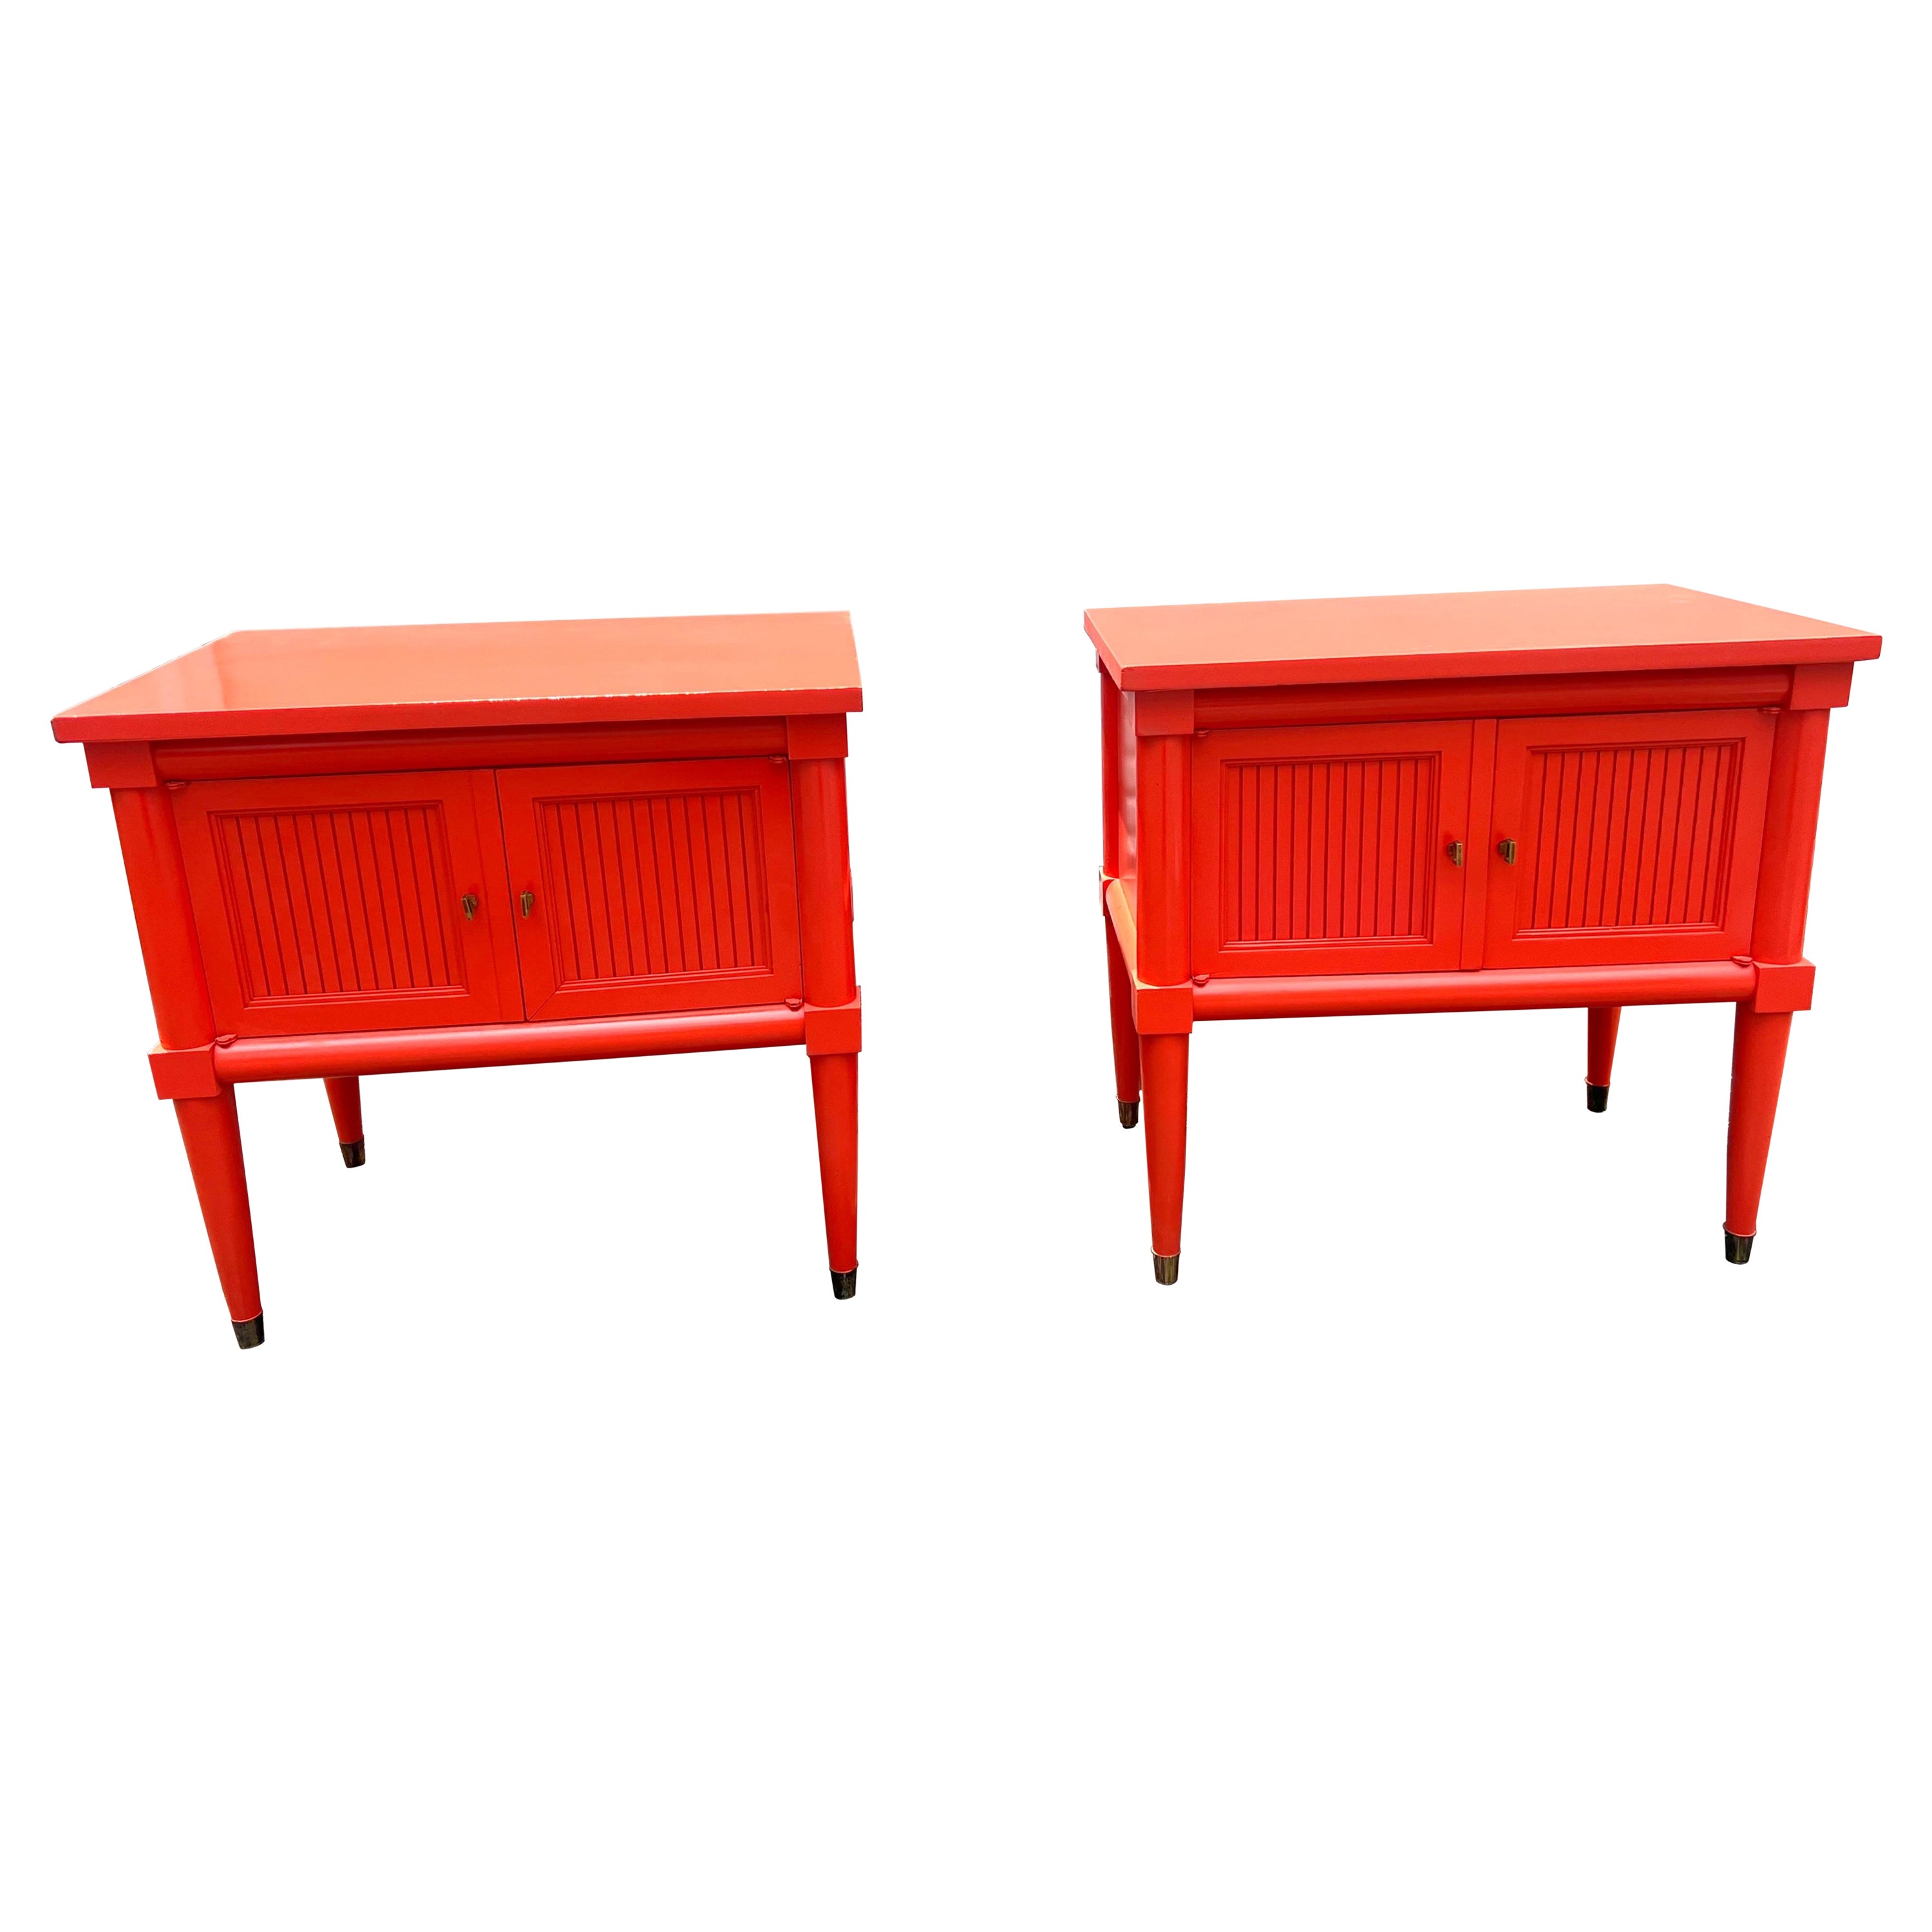 Pair of Mid-20th Century Neoclassical Tomato Red Lacquered Nightstands For Sale